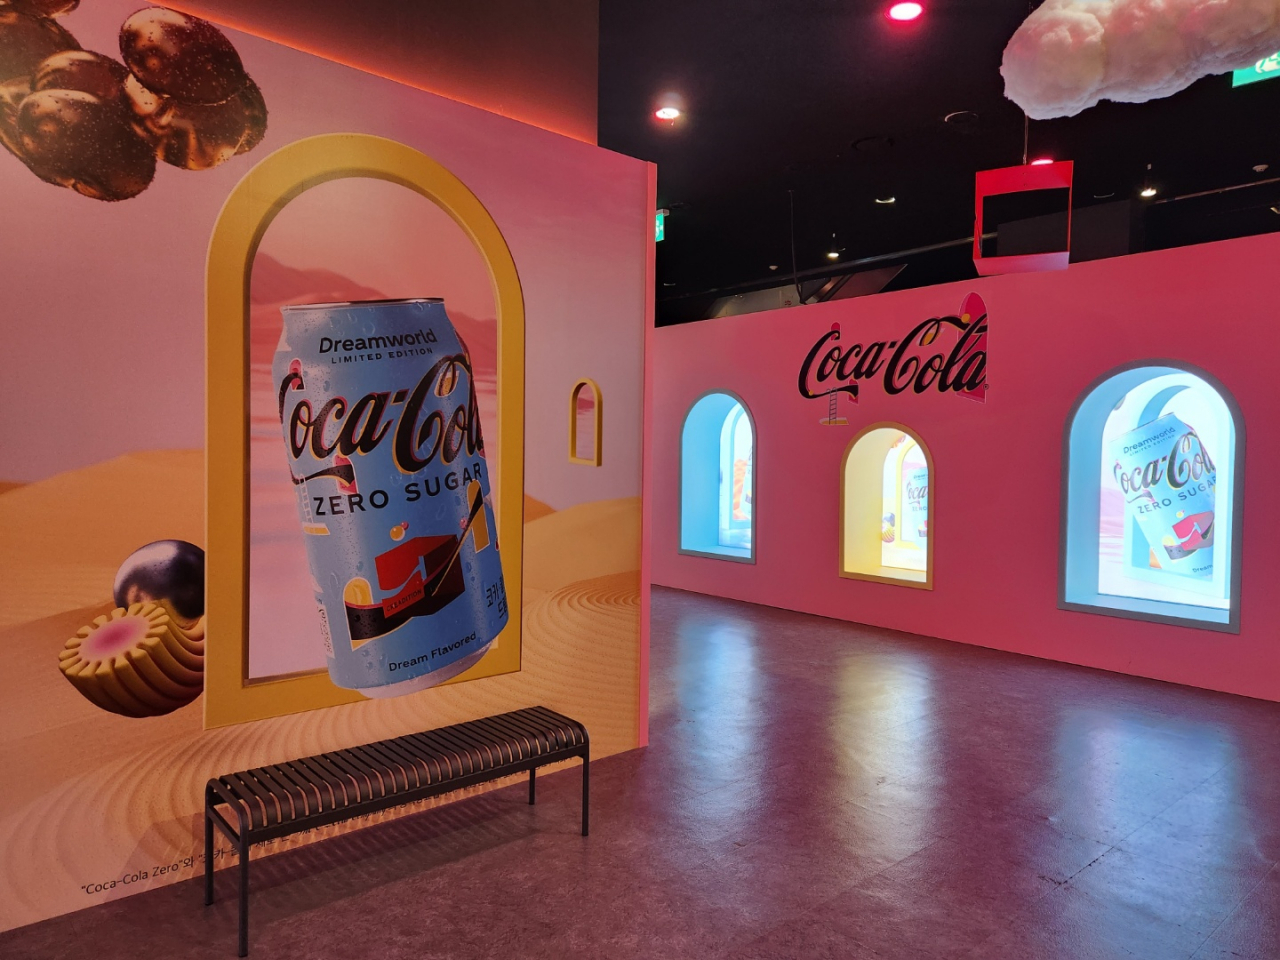 Inside Coca-Cola's Dreamworld pop-up exhibition, in collaboration with local media art company d'strict, at the Wisepark Hongdae in Seoul. (Choi Jae-hee / The Korea Herald)